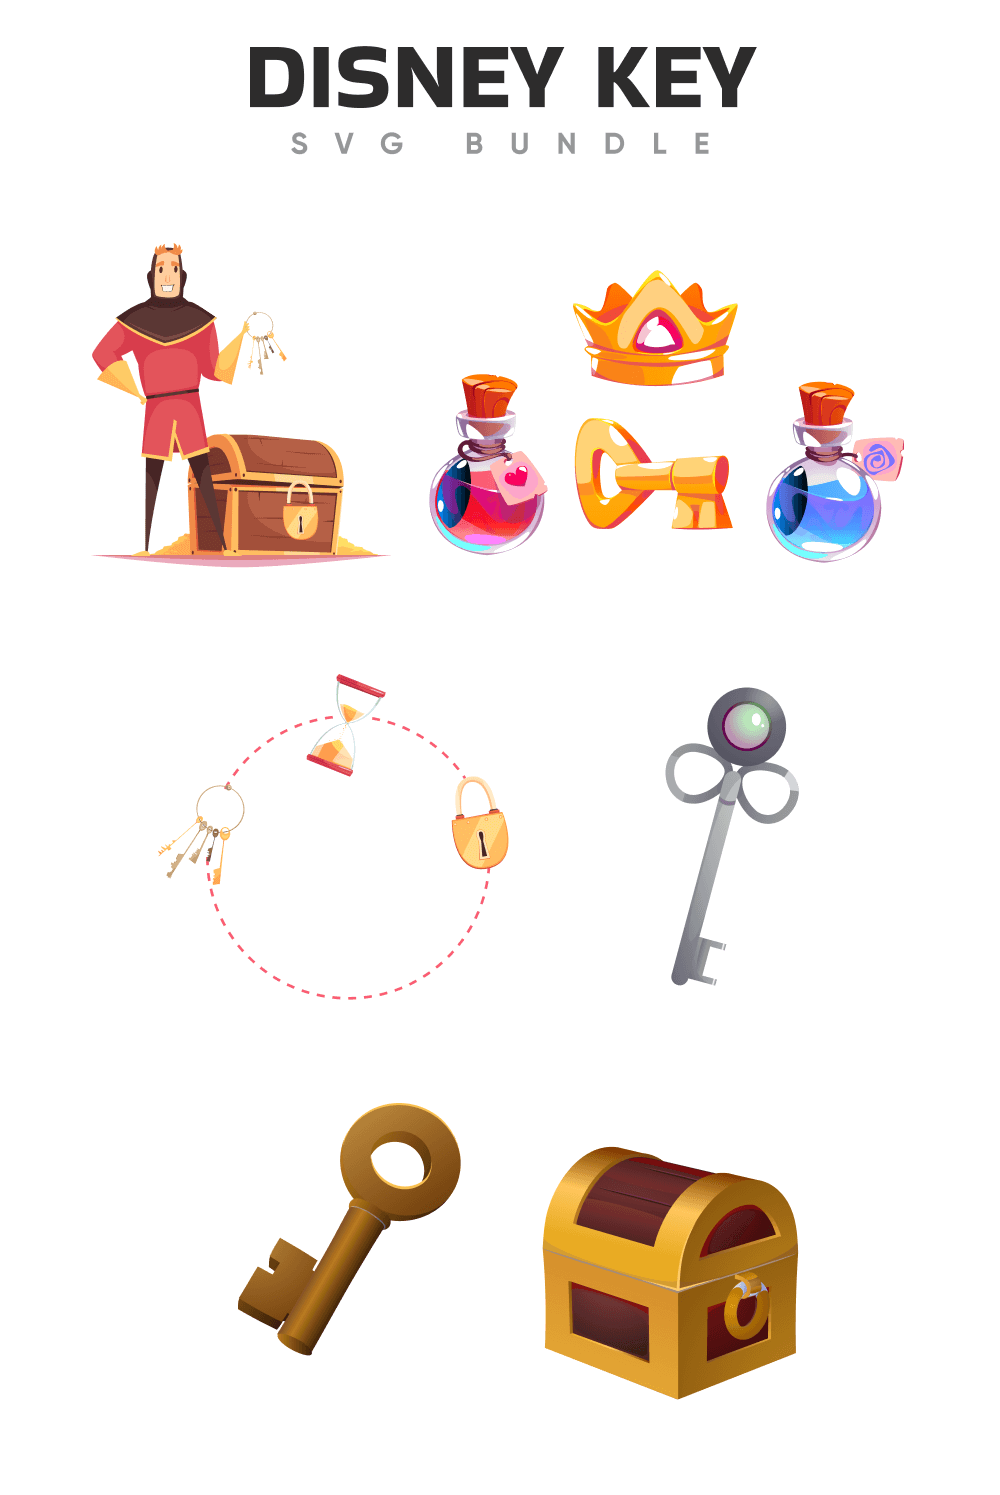 Drawings for Pinterest with Disney keys, prince character with keys near the chest, vessels with pink and blue vessel, golden key, golden crown.